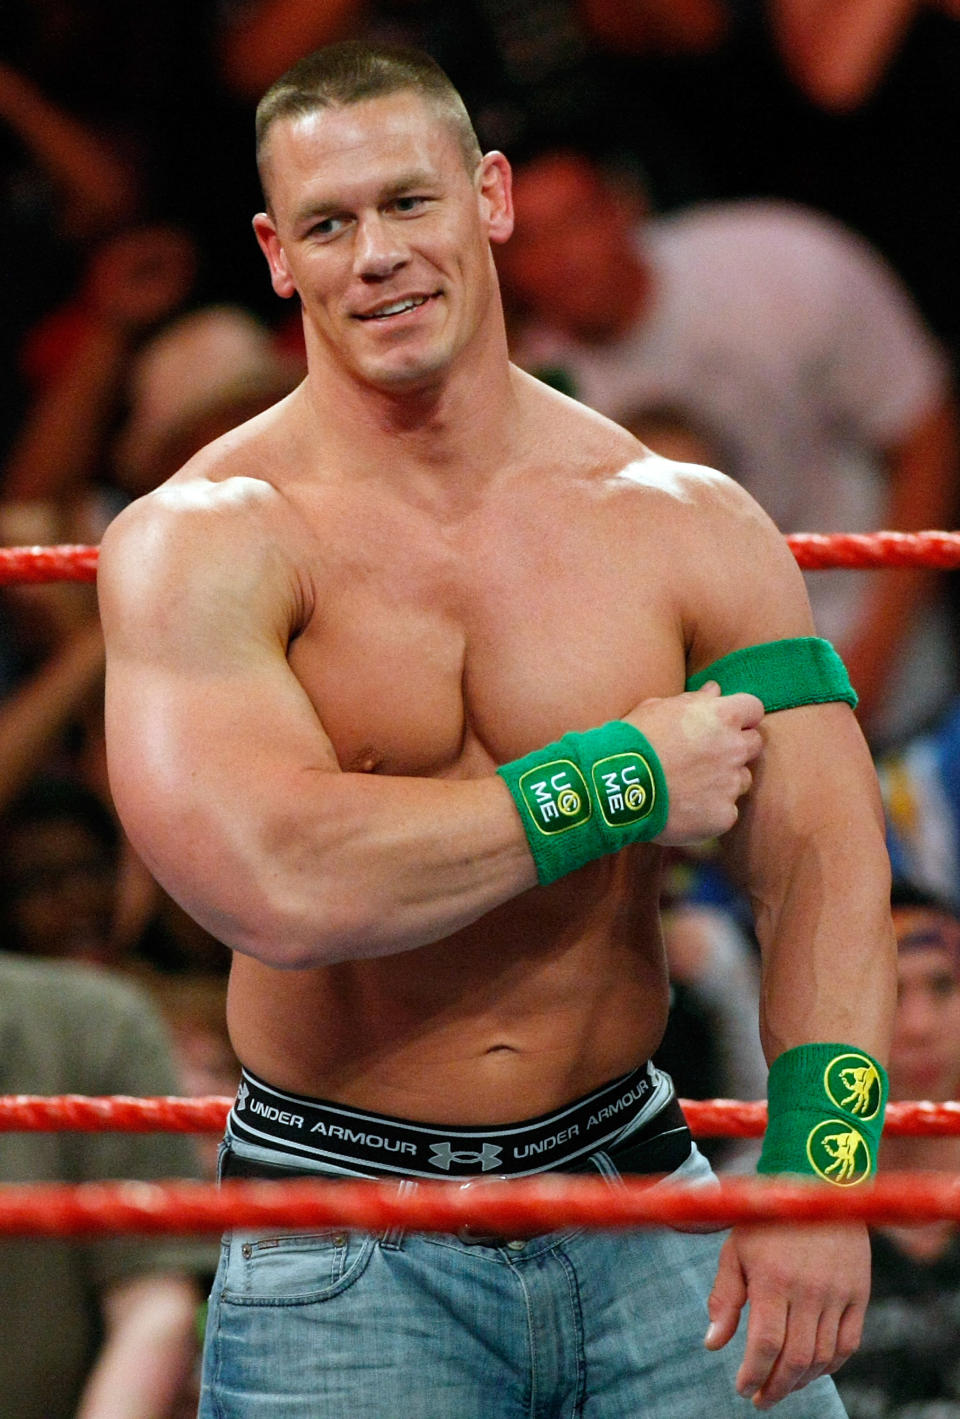 <p><span>John Cena is a man of many talents, but chauffeur is not one of them. Cena briefly worked as a limo driver before making it big in the WWE. He admitted to being terrible at direction and would rarely arrive at the destination on time.</span> </p>